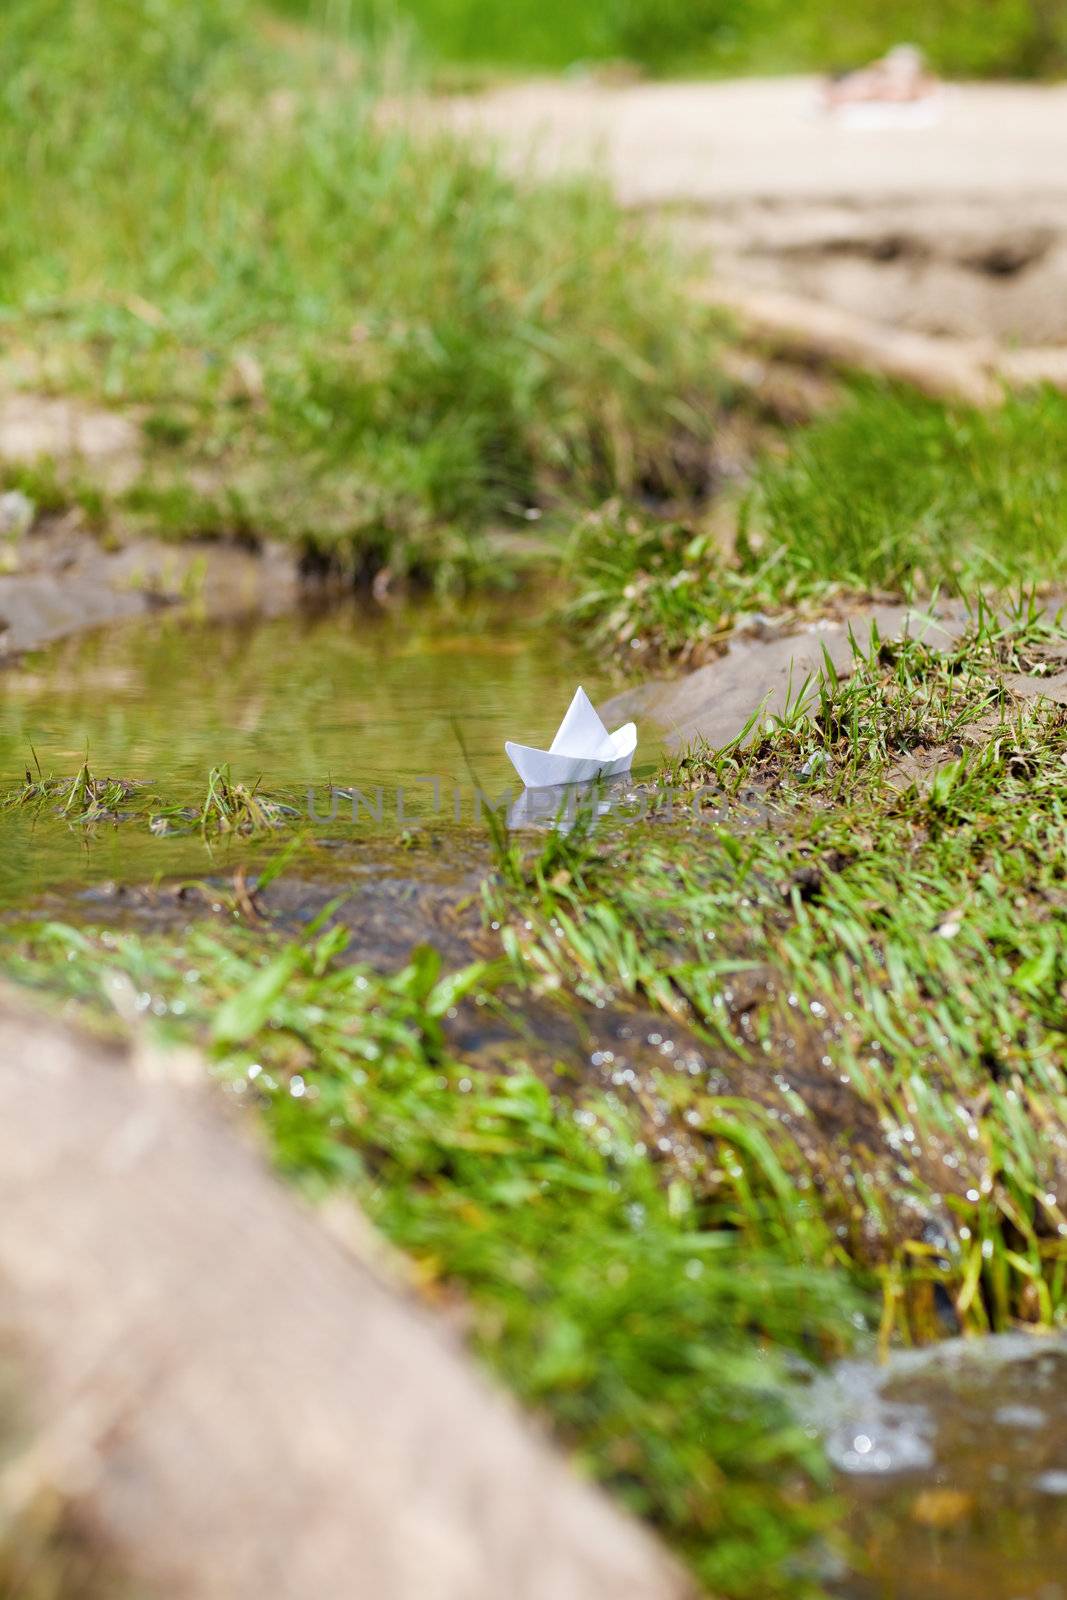 A Toy Boat in a Stream